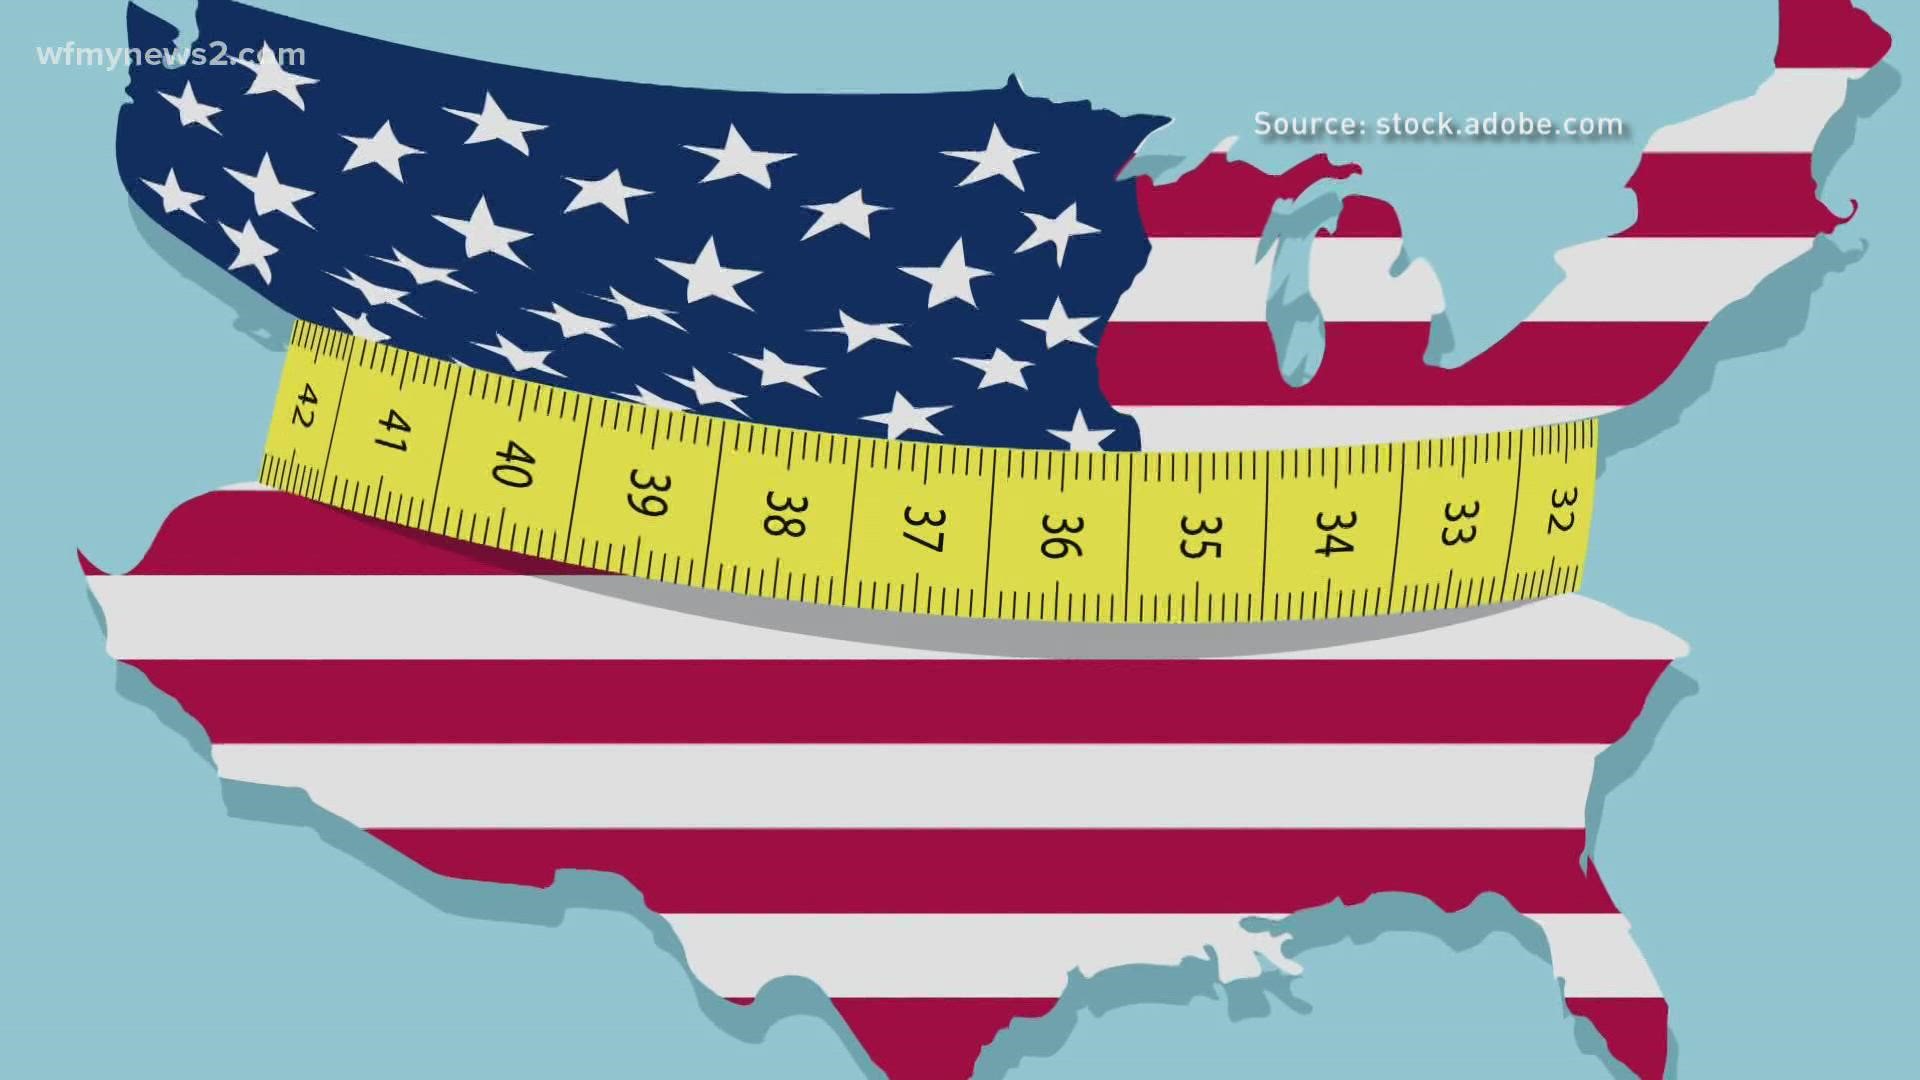 A UNCG doctor researches why America is obese and looks at how parenting plays a role.